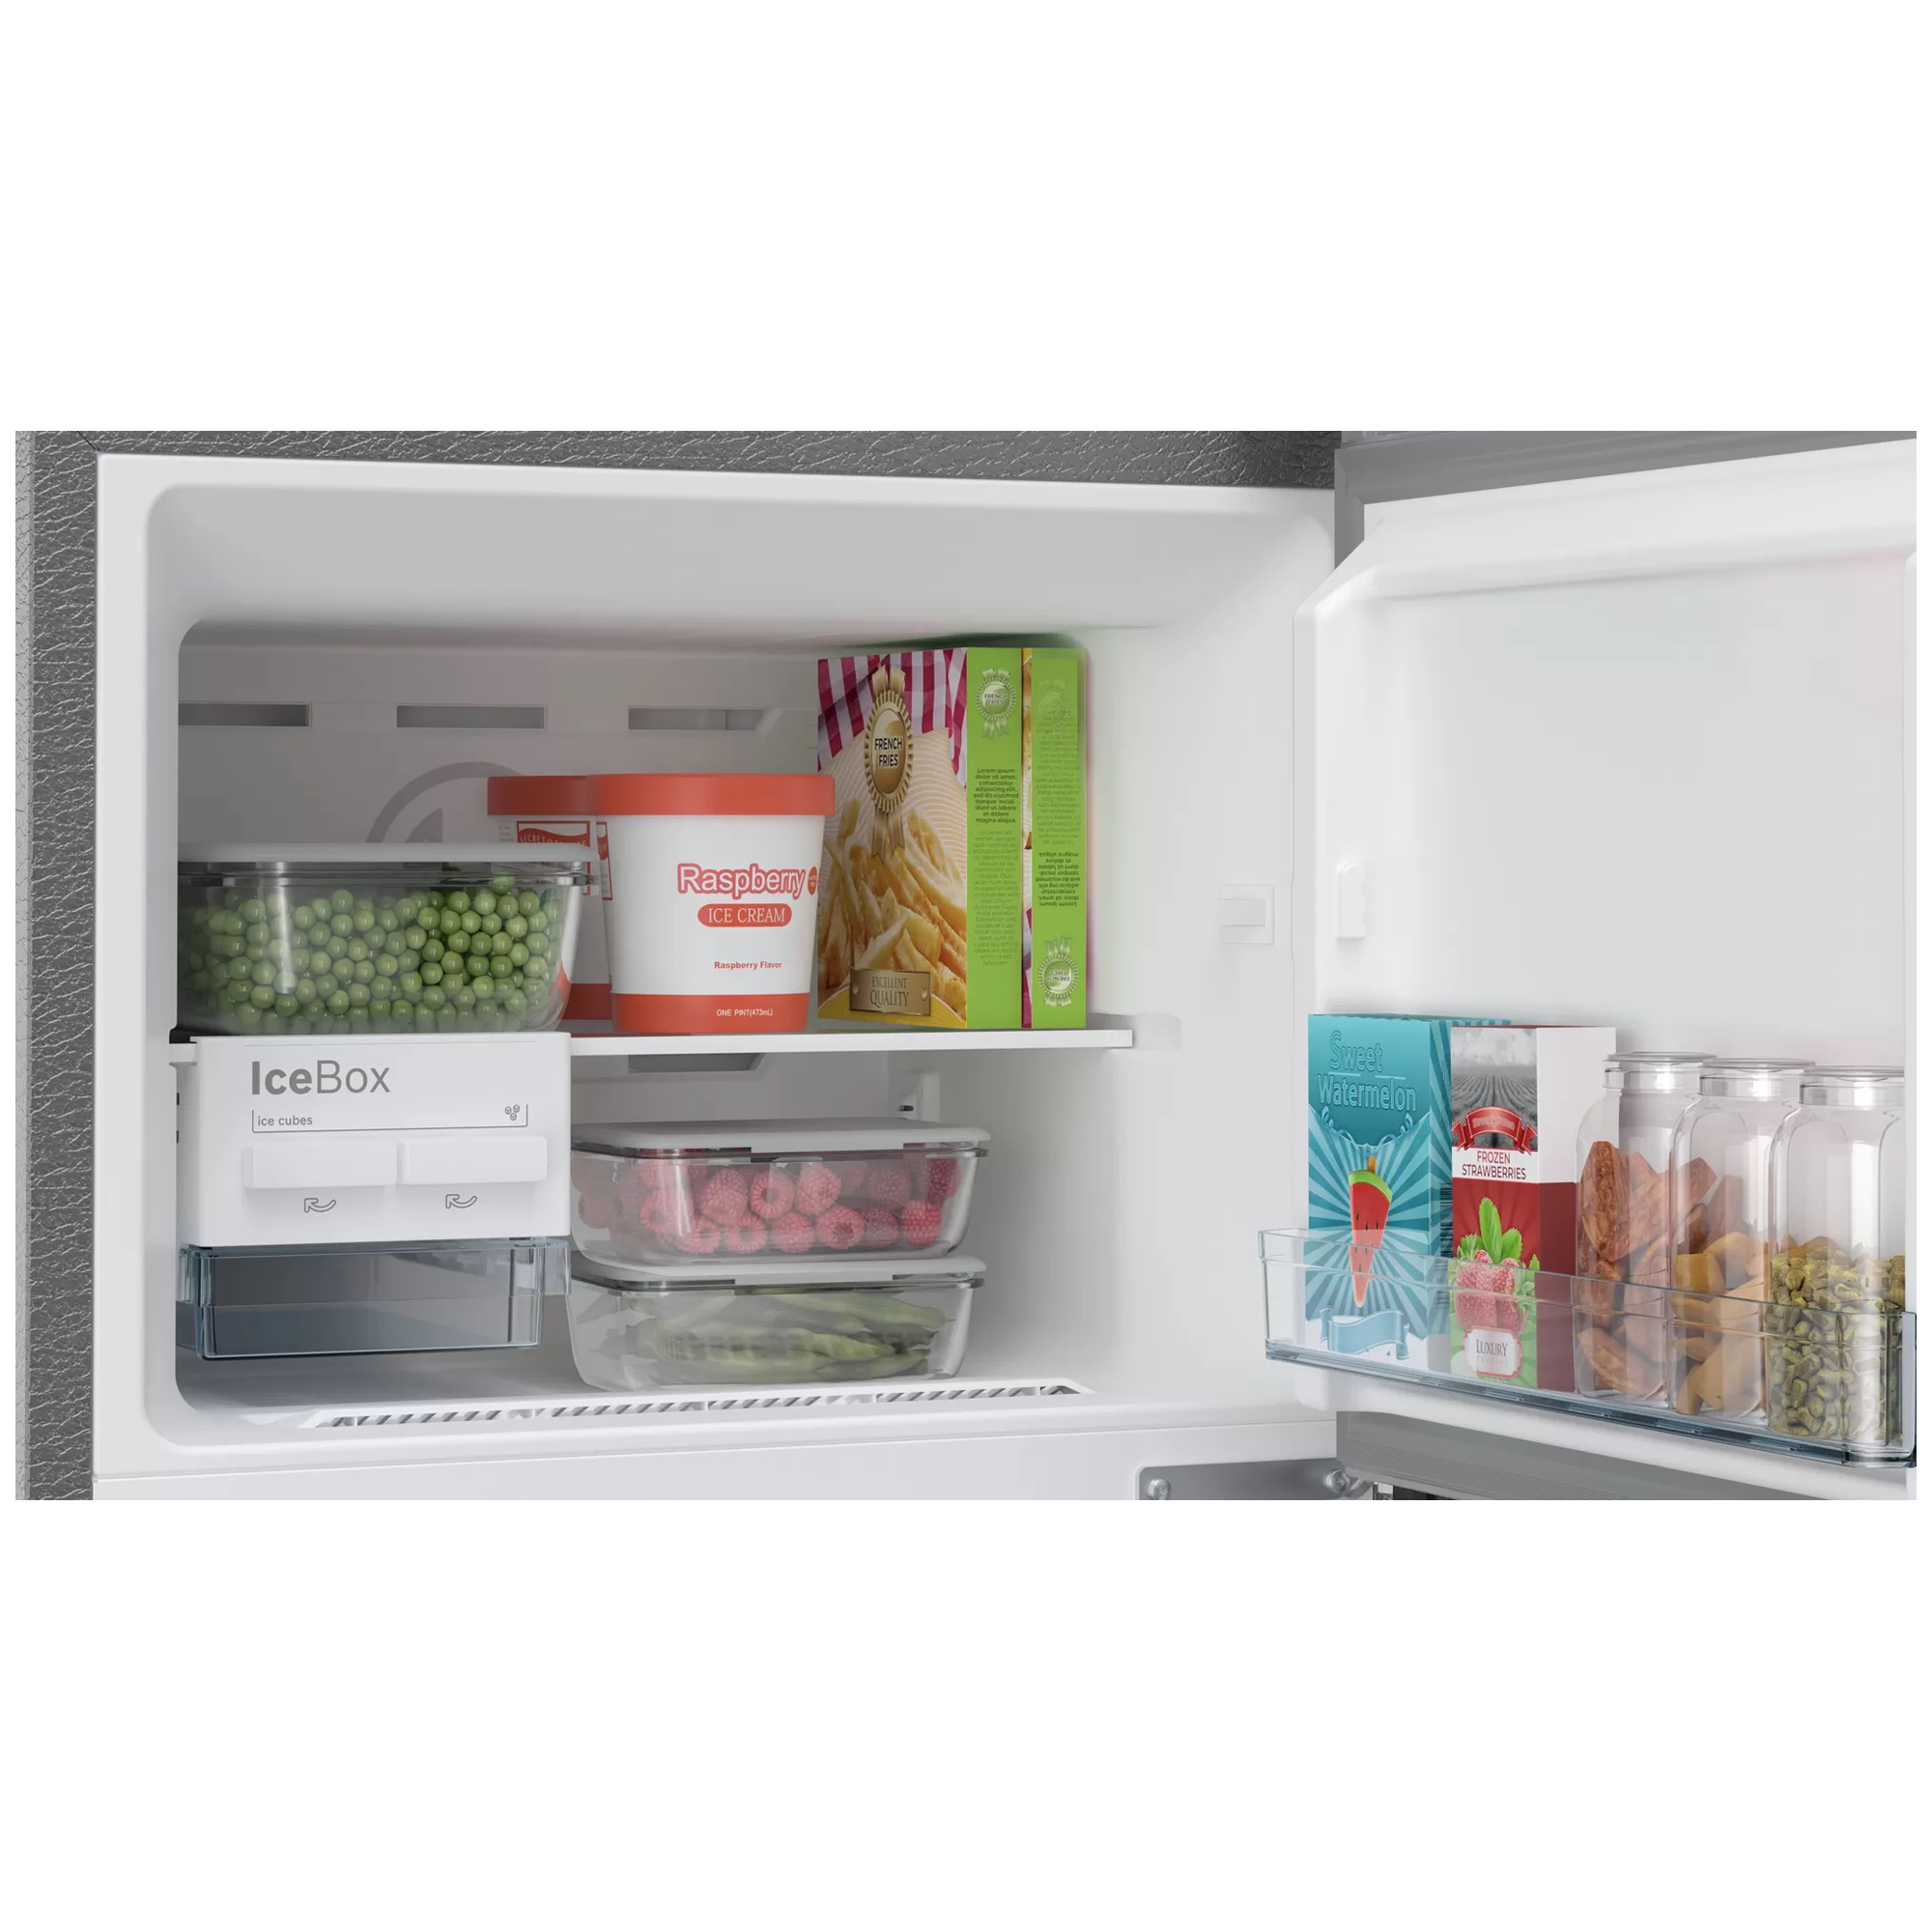 Bosch Series 4 290 Litres 3 Star Frost Free Double Door Convertible Refrigerator with Temperature Display (CTC29S03NI, Shiney Silver)_3